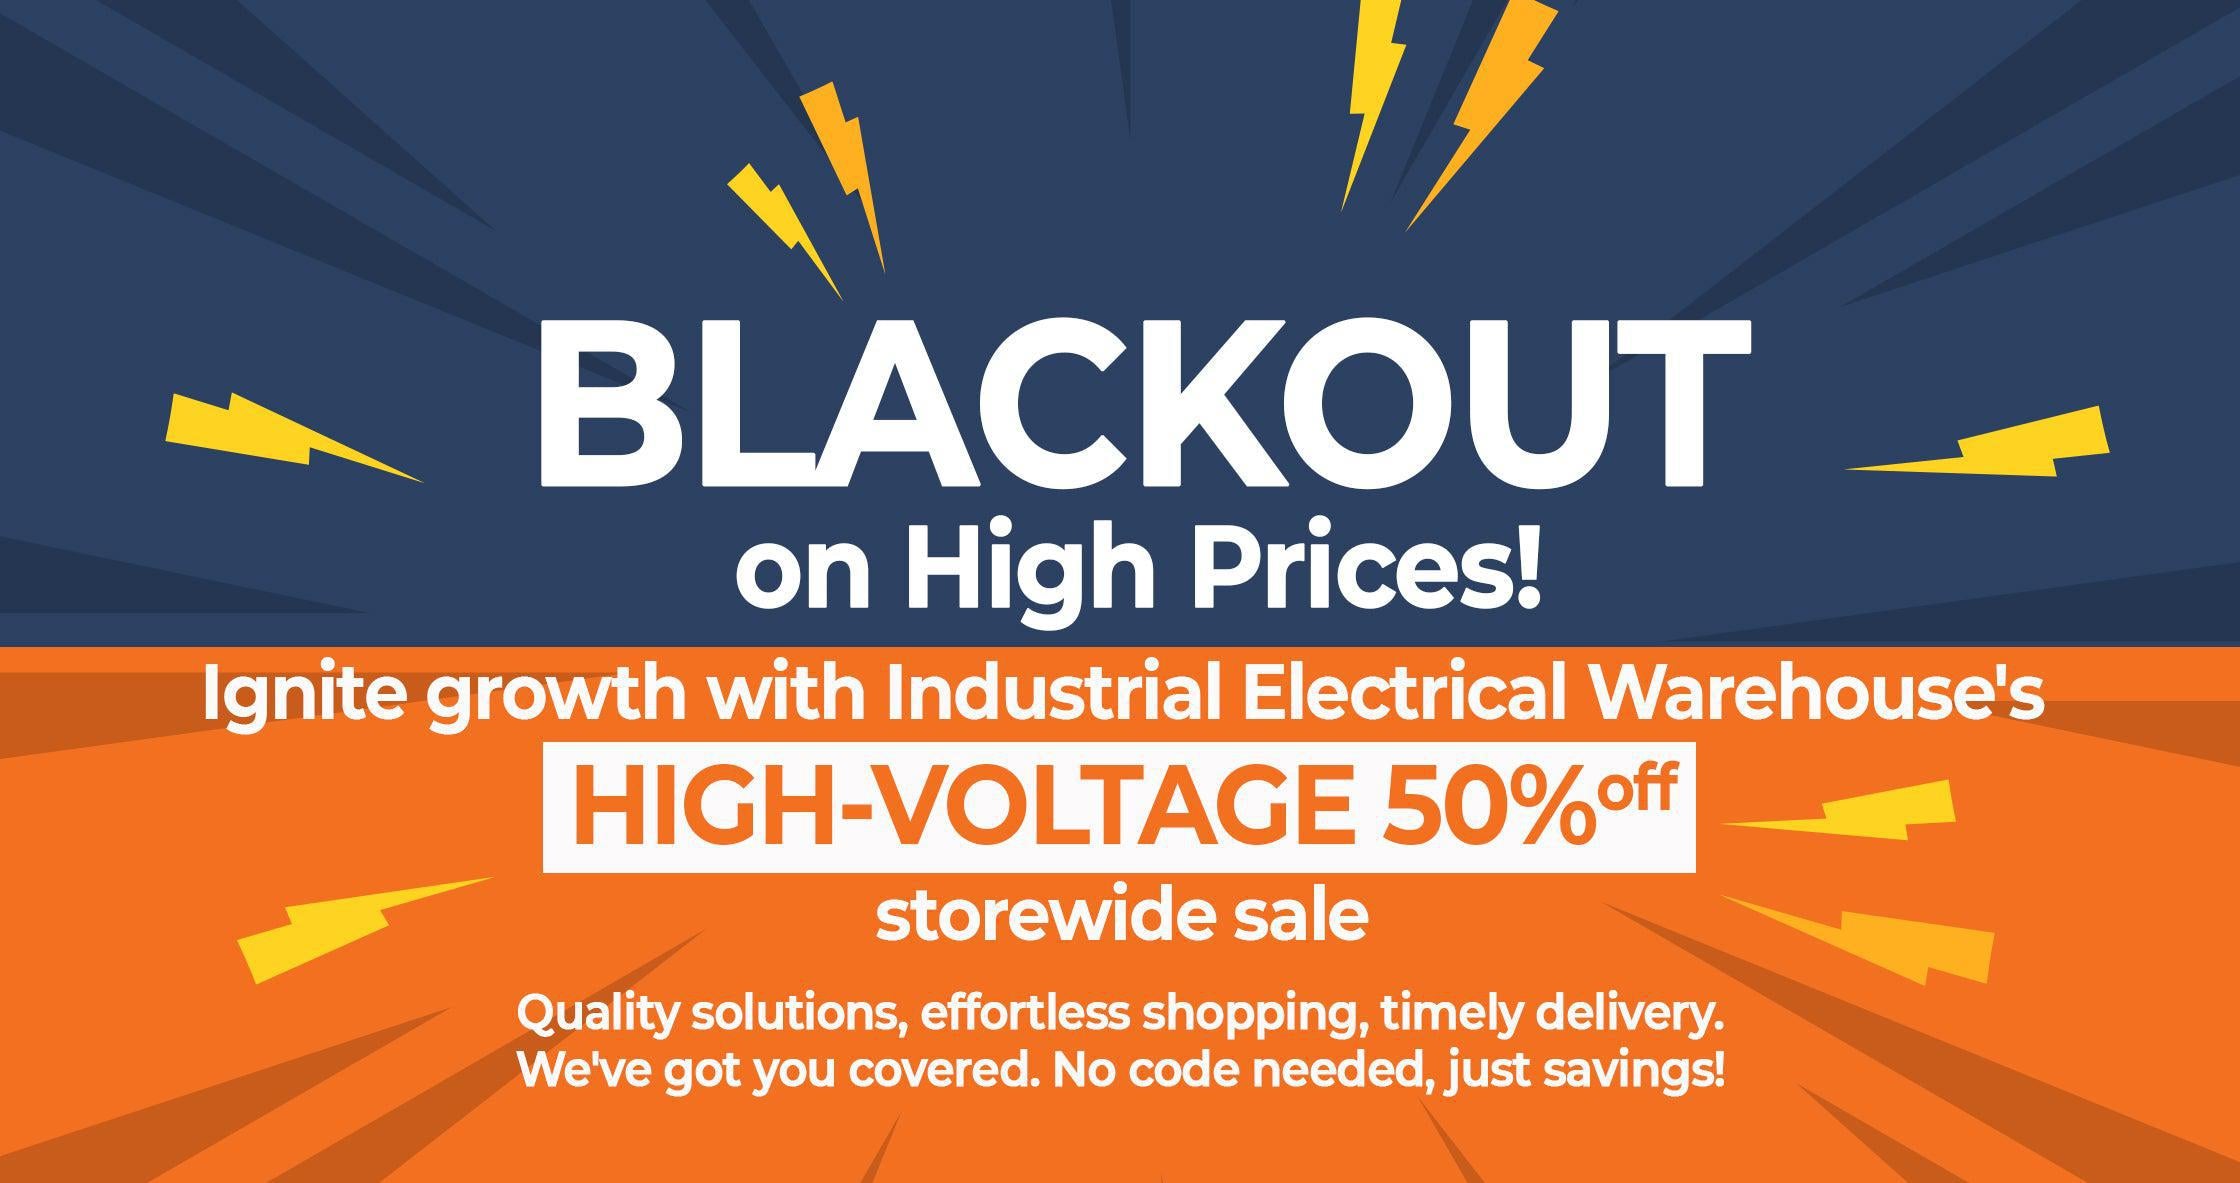 BLACKOUT on High Prices! - Ignite growth with Industrial Electrical Warehouse's HIGH-VOLTAGE 50% off storewide sale. Quality solutions, effortless shopping, timely delivery. We've got you covered. No code needed, just savings!